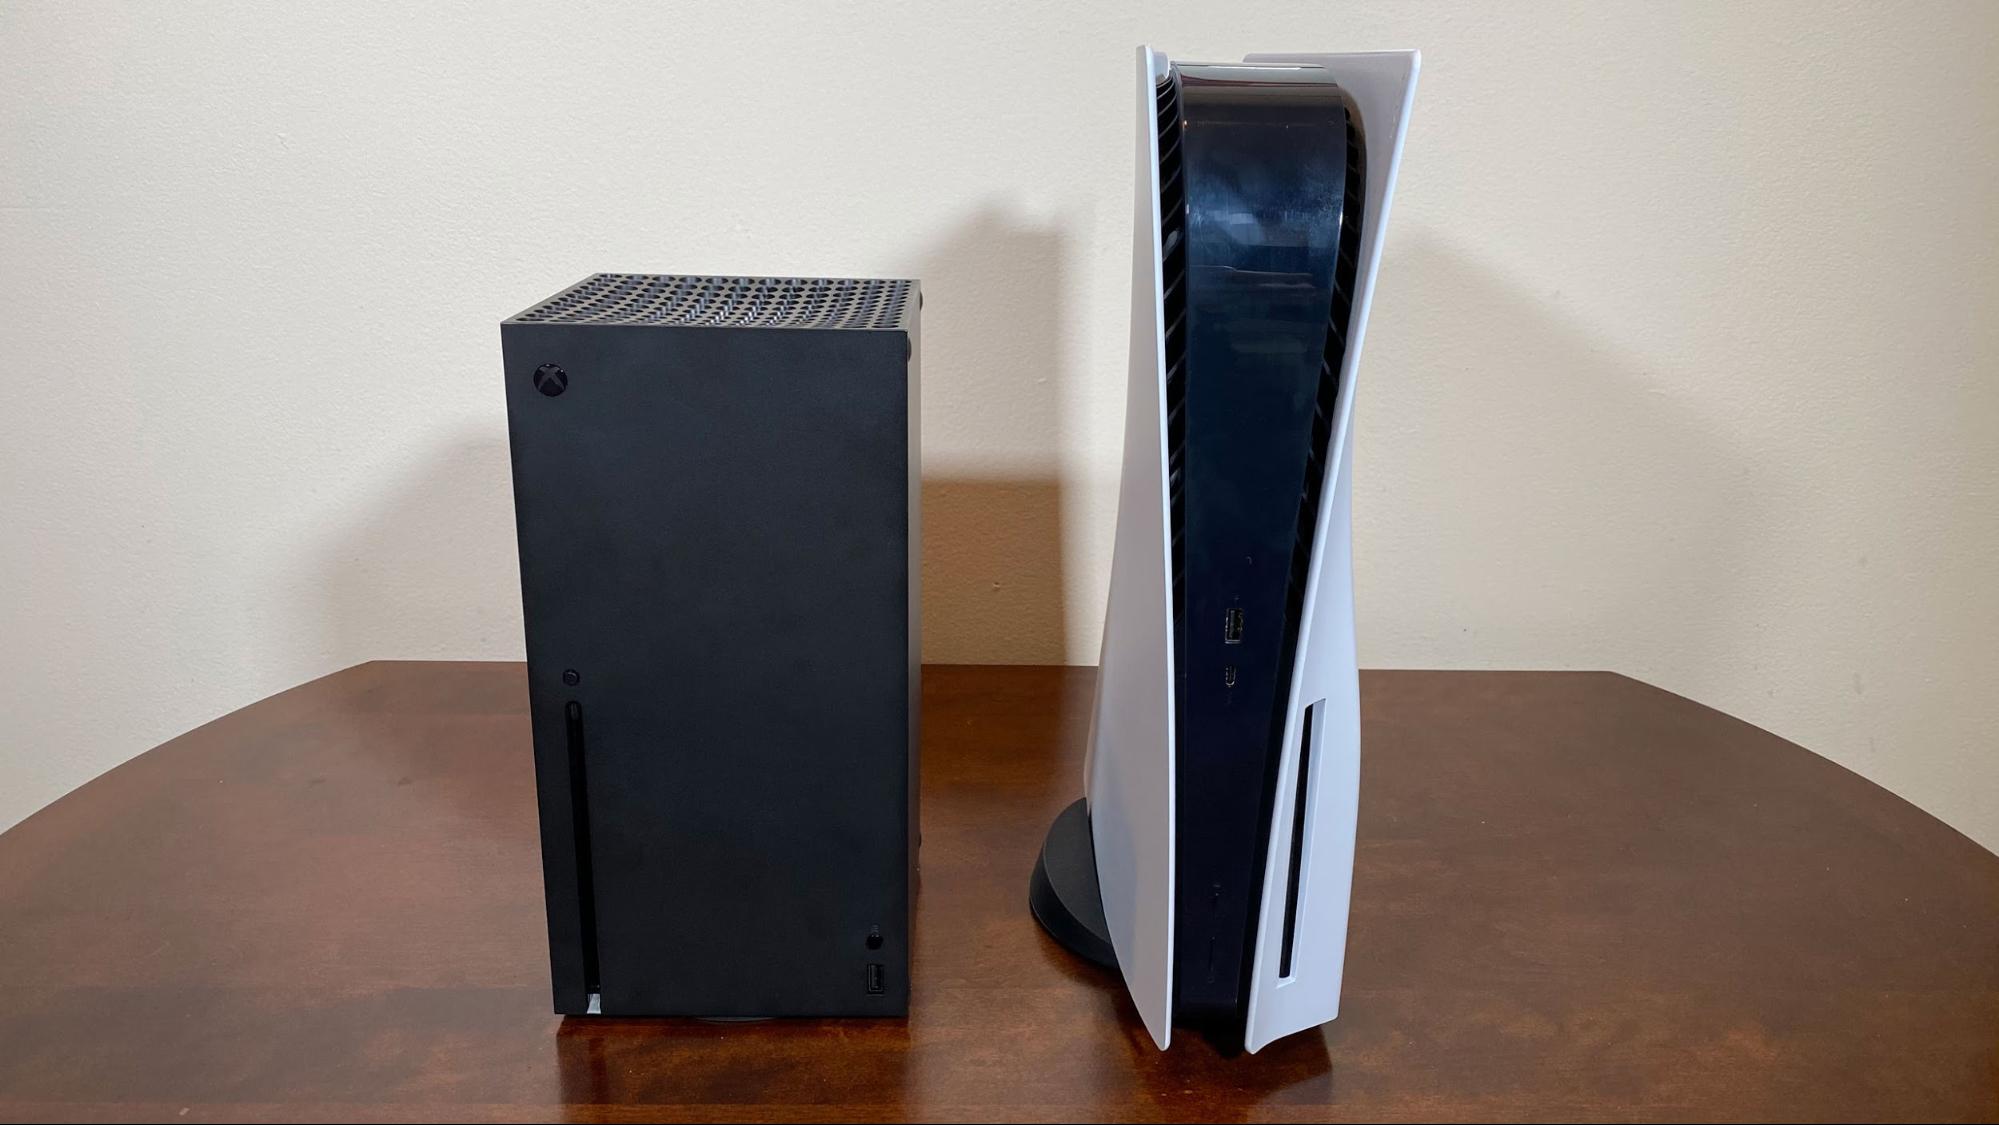 xbox series x or playstation 5